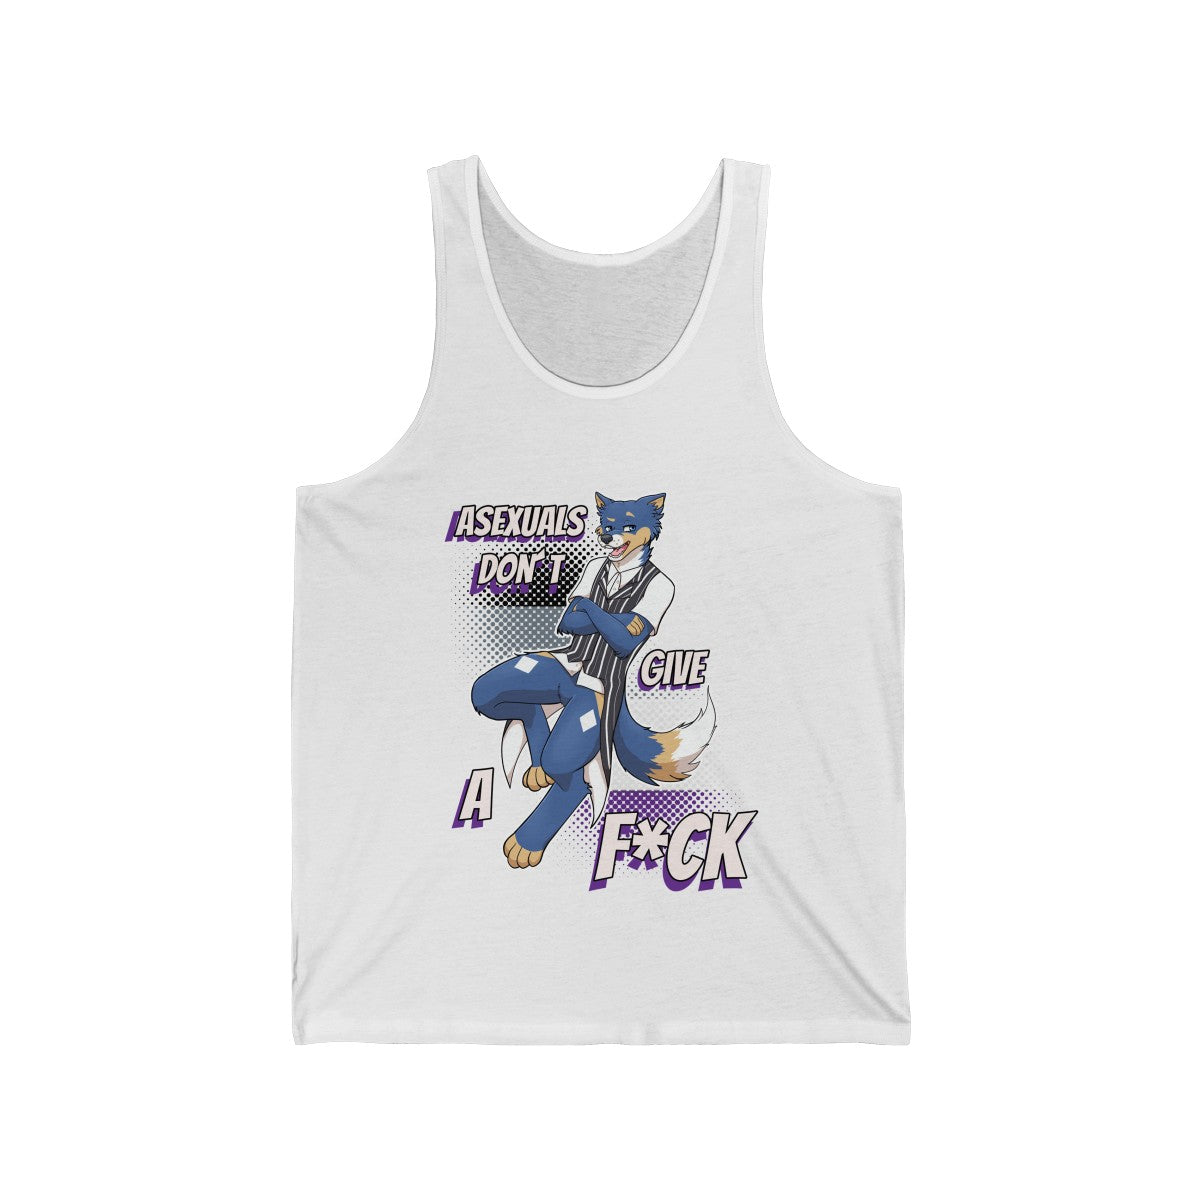 Asexual Don't Give A F*ck - Tank Top Tank Top Artemis Wishfoot White XS 